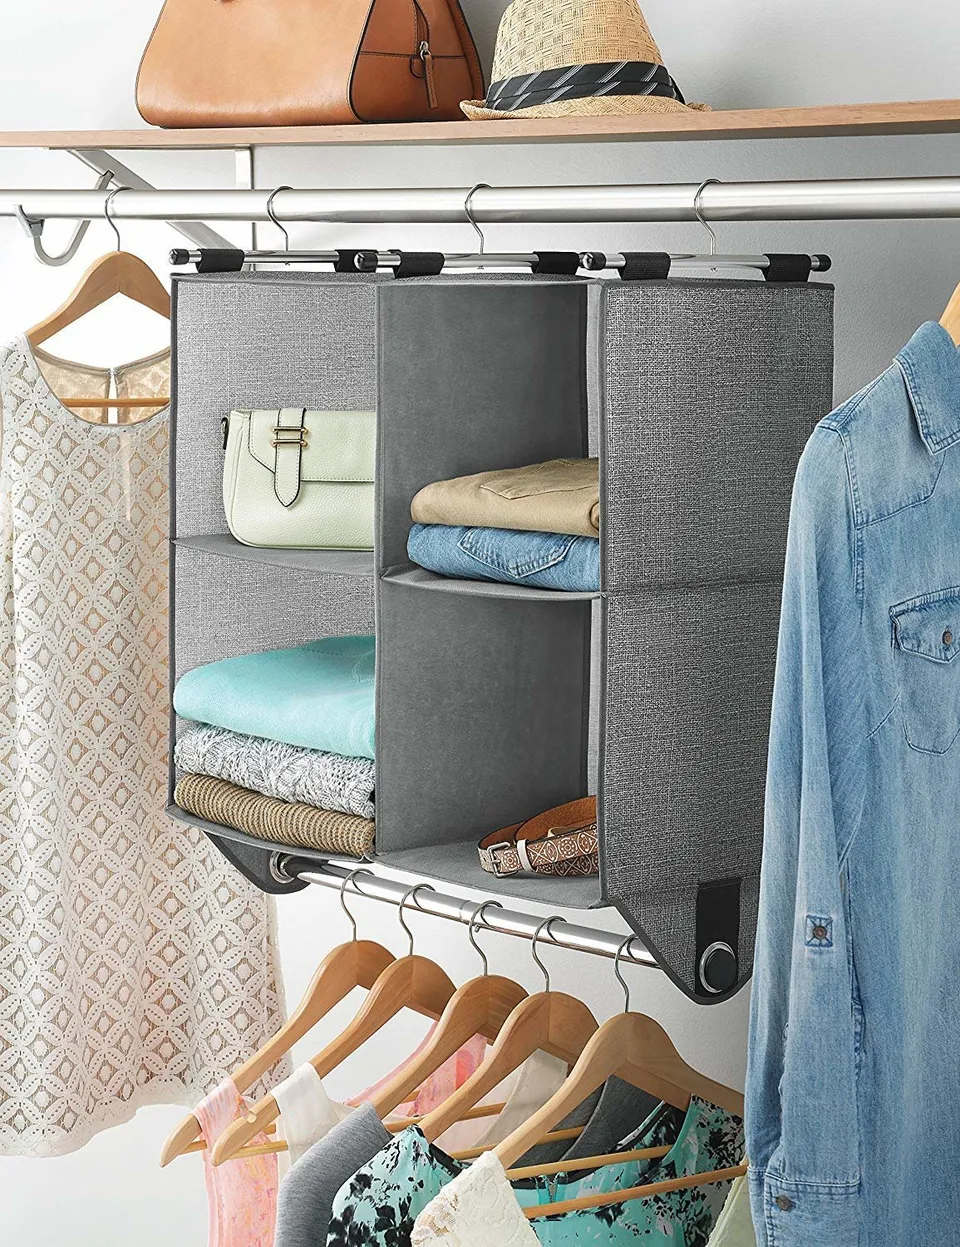 15 Closet Organization Ideas for Whipping Your Closet Into Shape